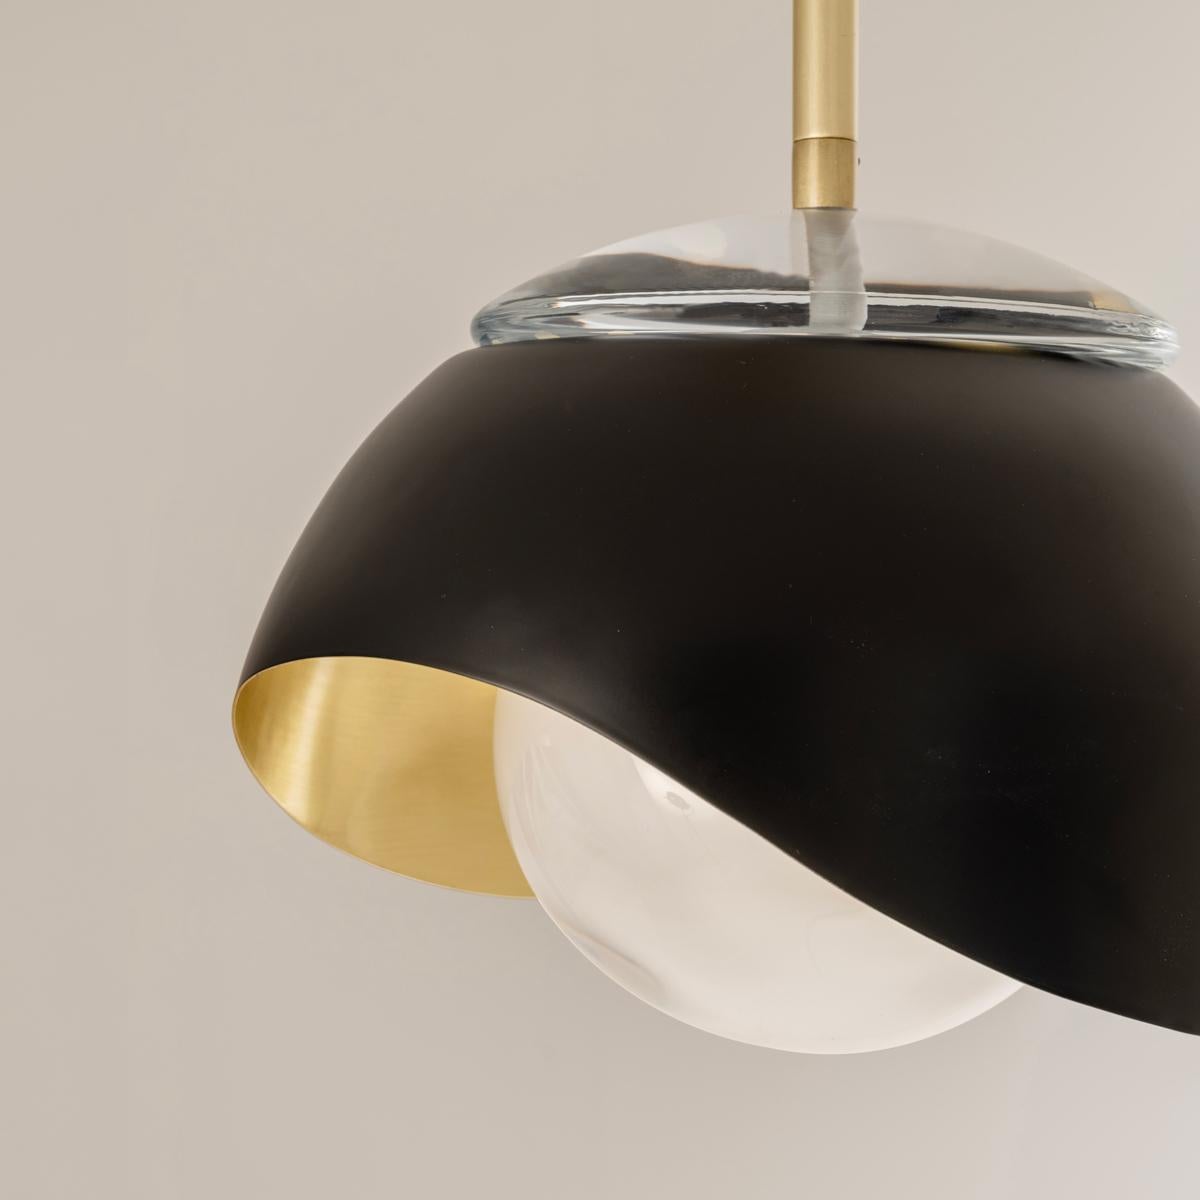 Contemporary Perla Pendant by Gaspare Asaro-Black and Satin Brass For Sale